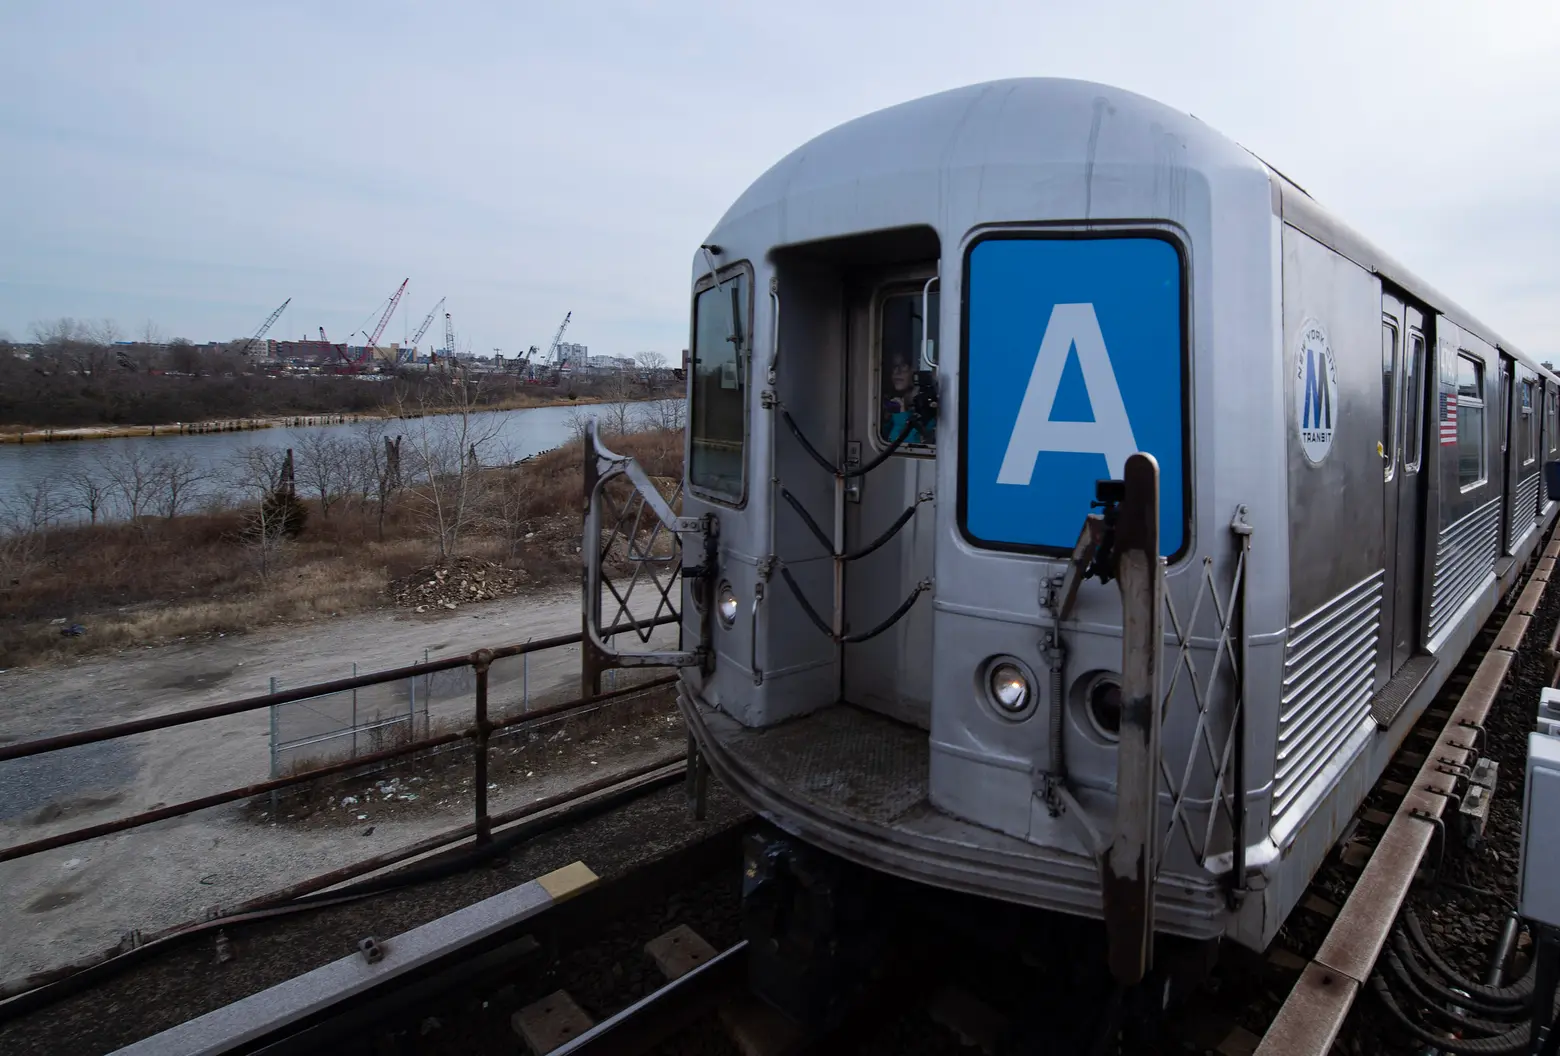 50-year-old R-42 subway cars are finally being retired